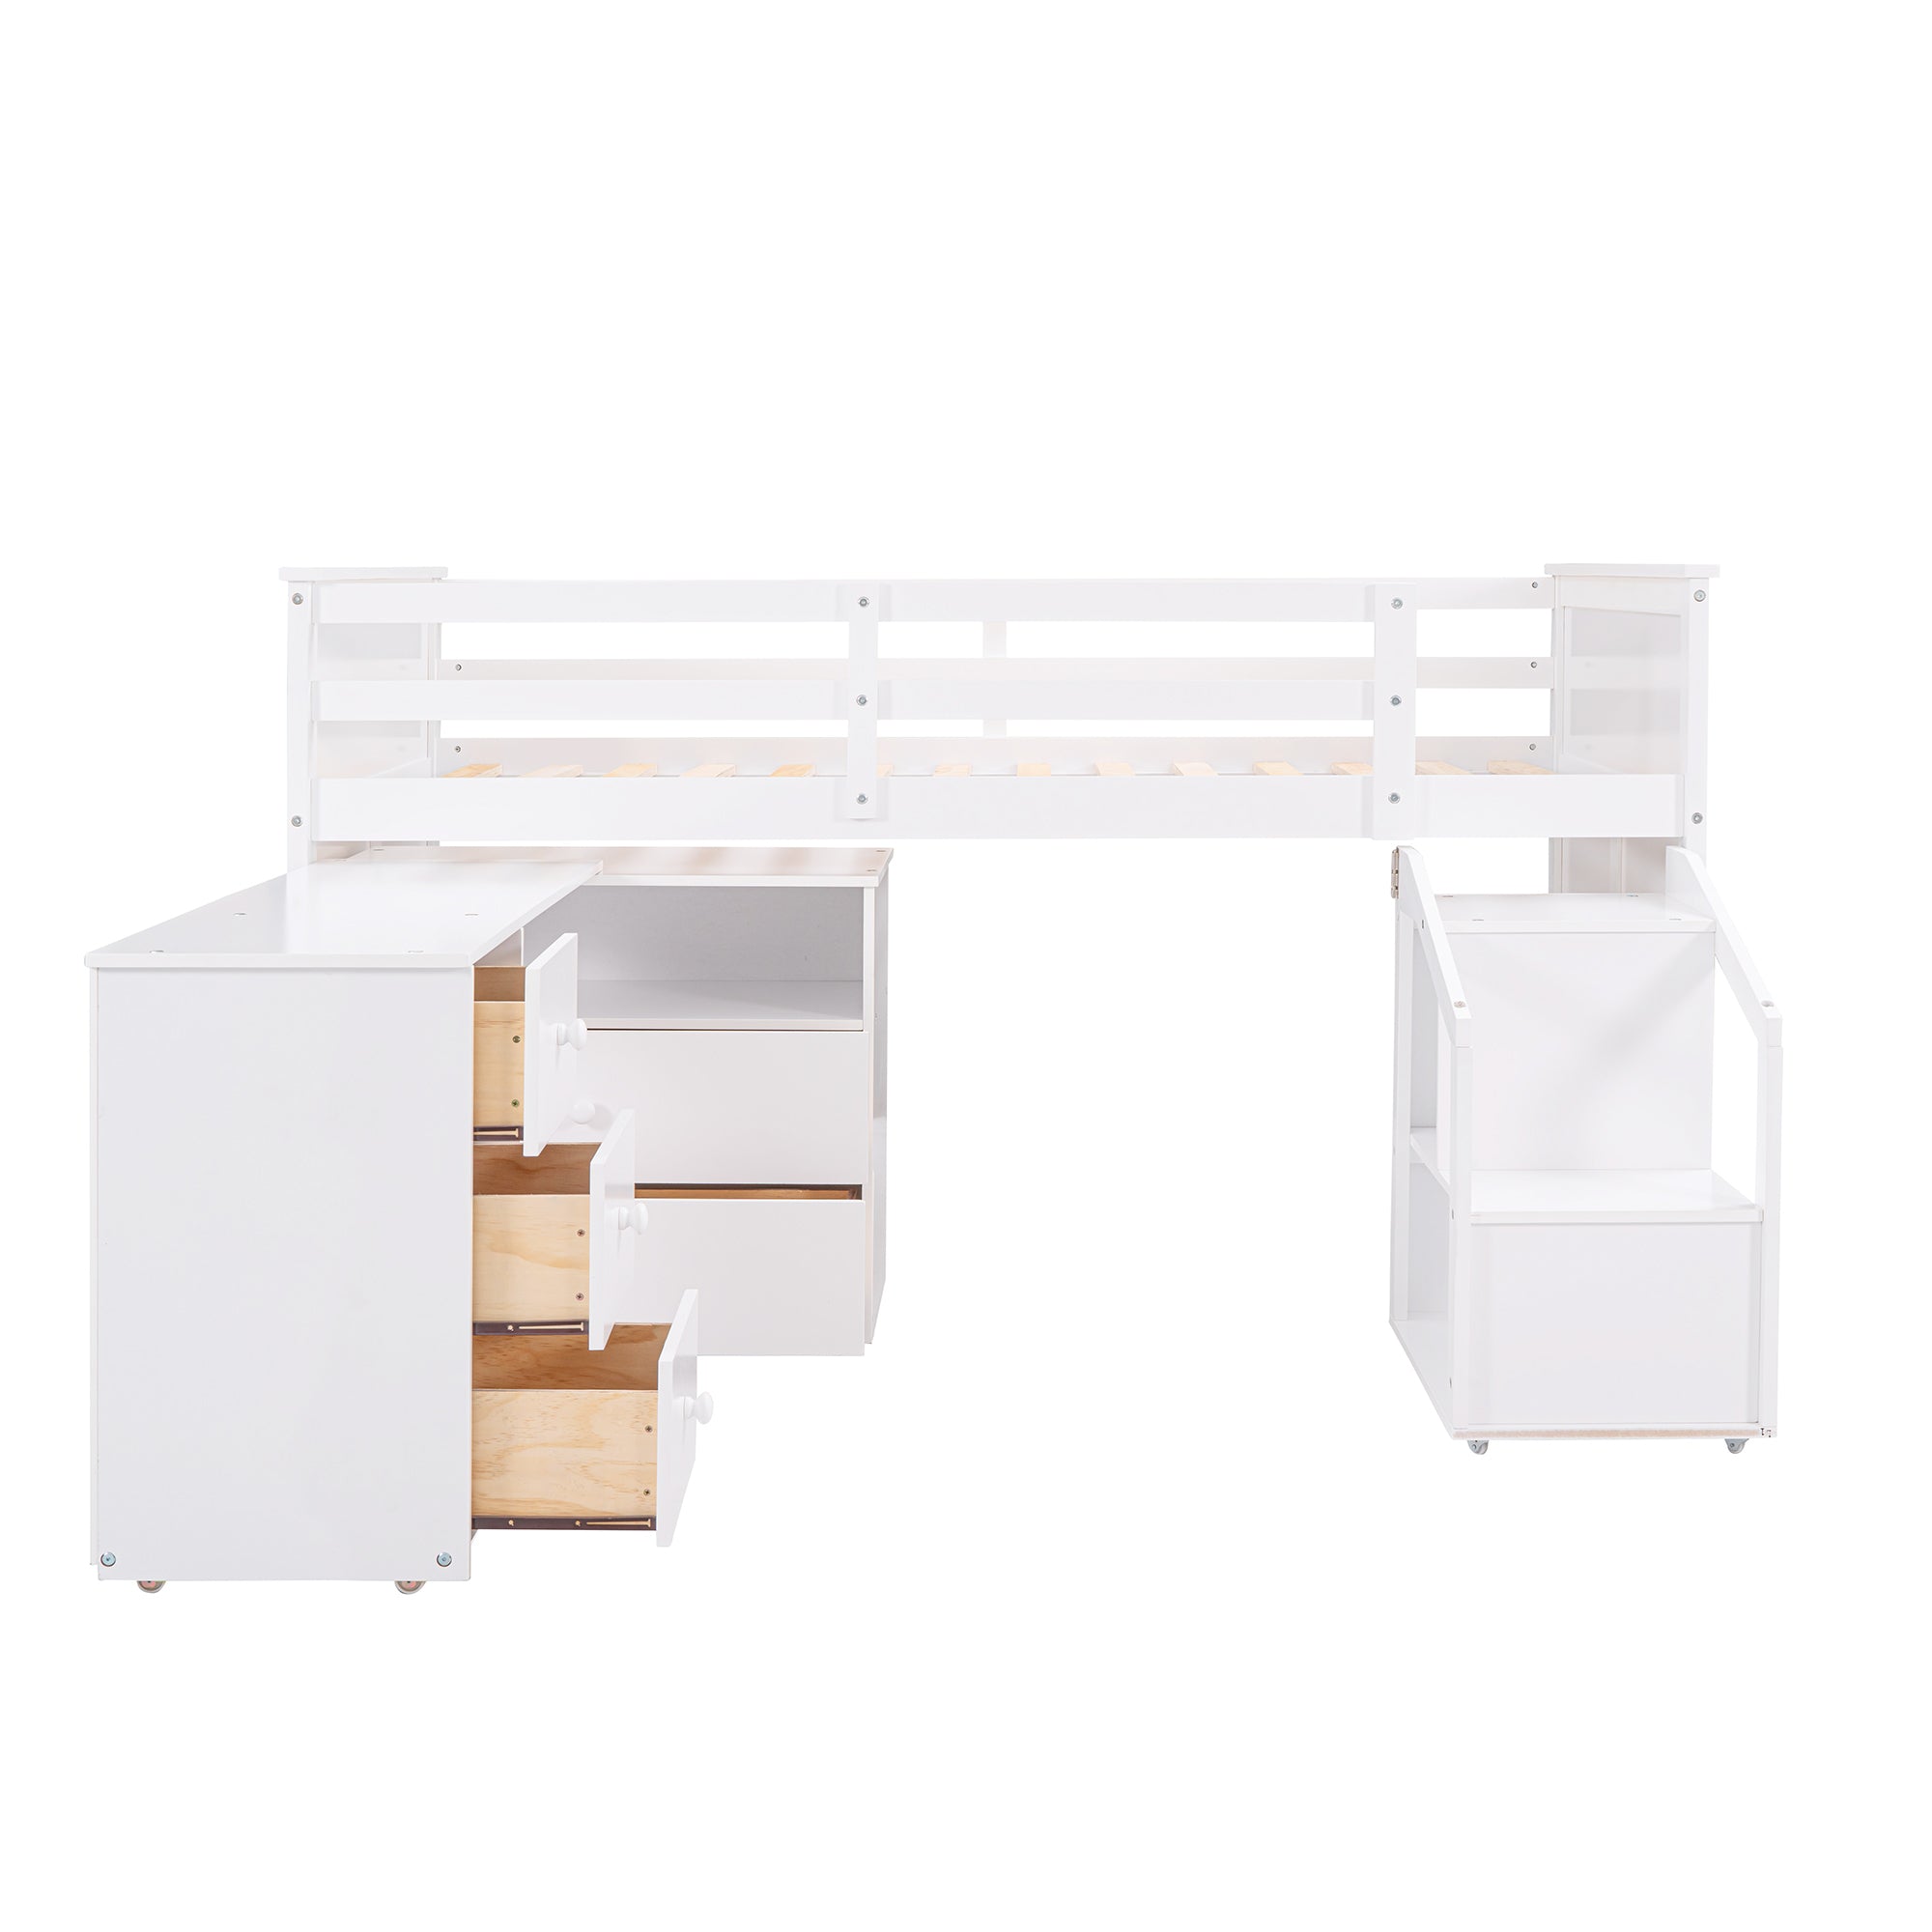 Loft Bed Low Study Twin Size Loft Bed With Storage Steps and Portable (White)